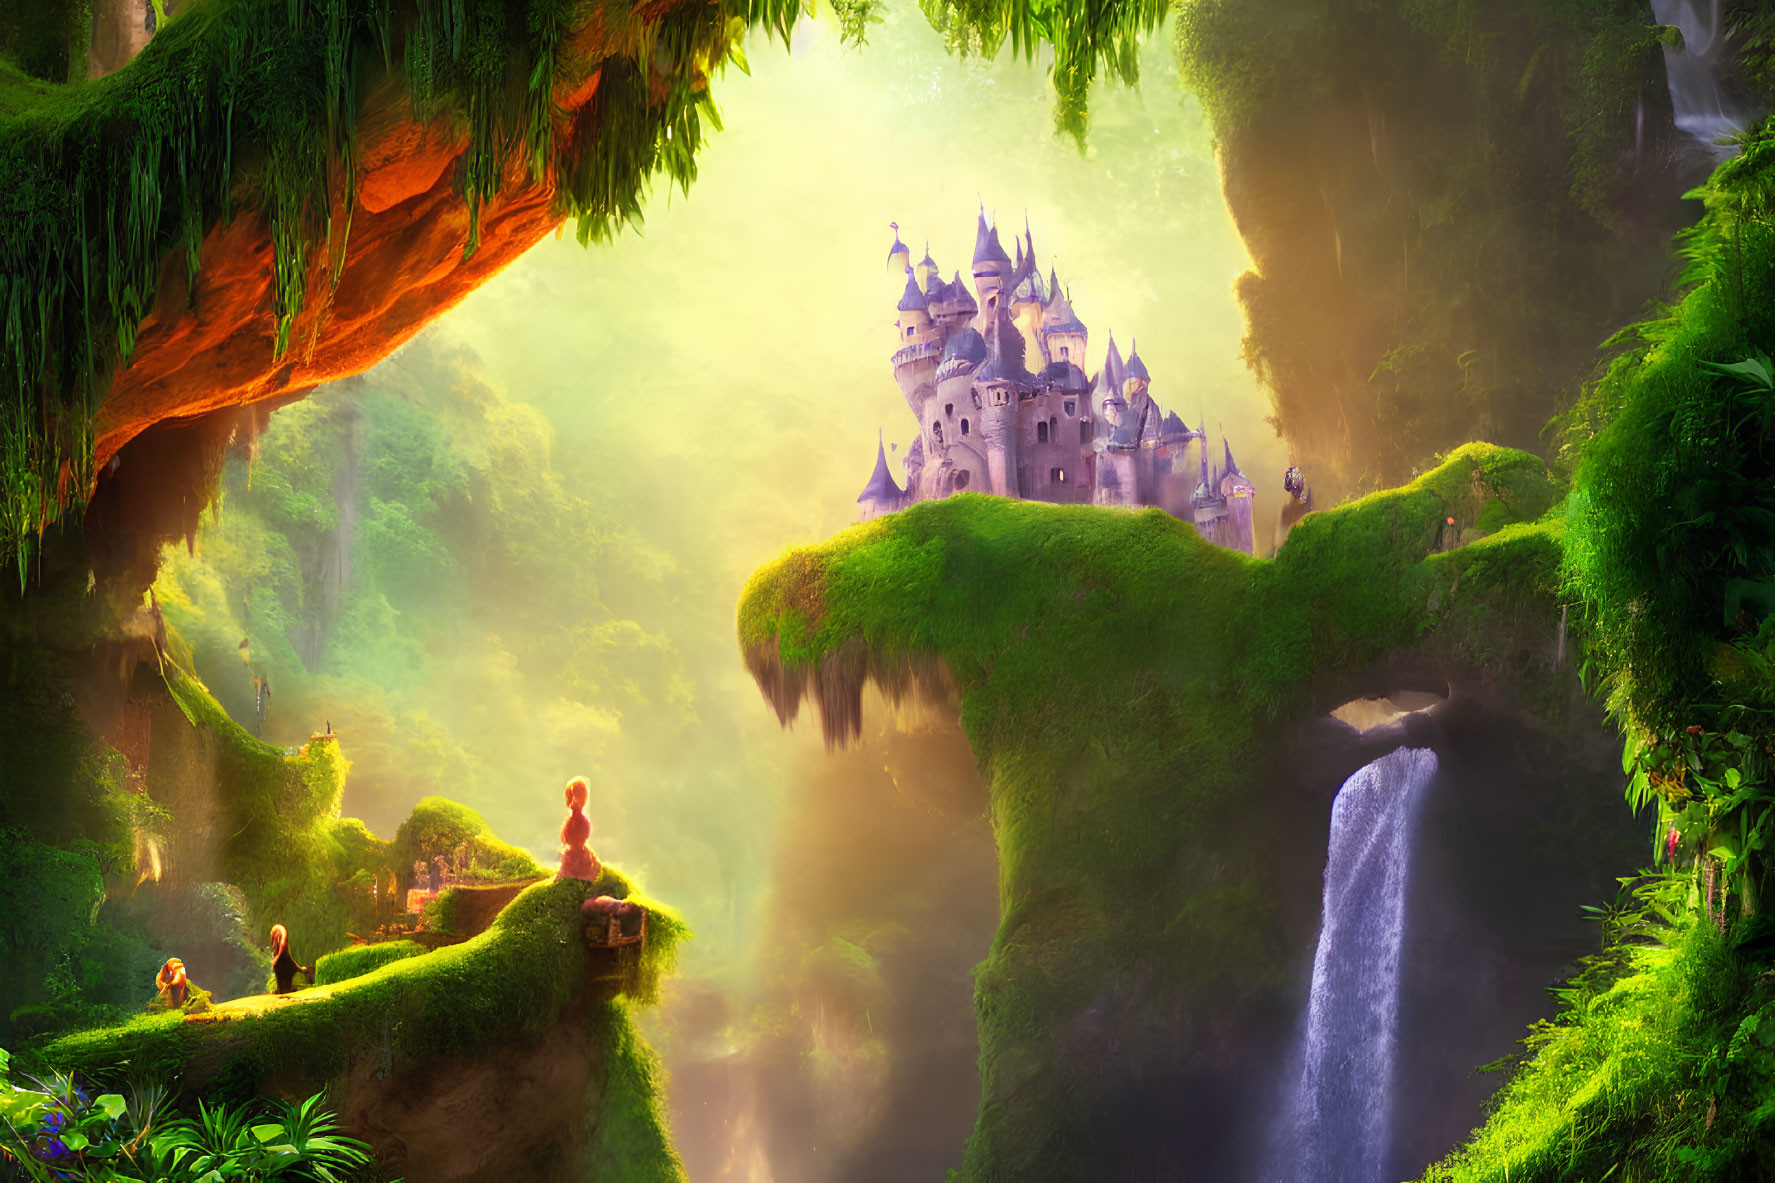 Fantastical landscape with castle, waterfalls, and figure overlooking cliff